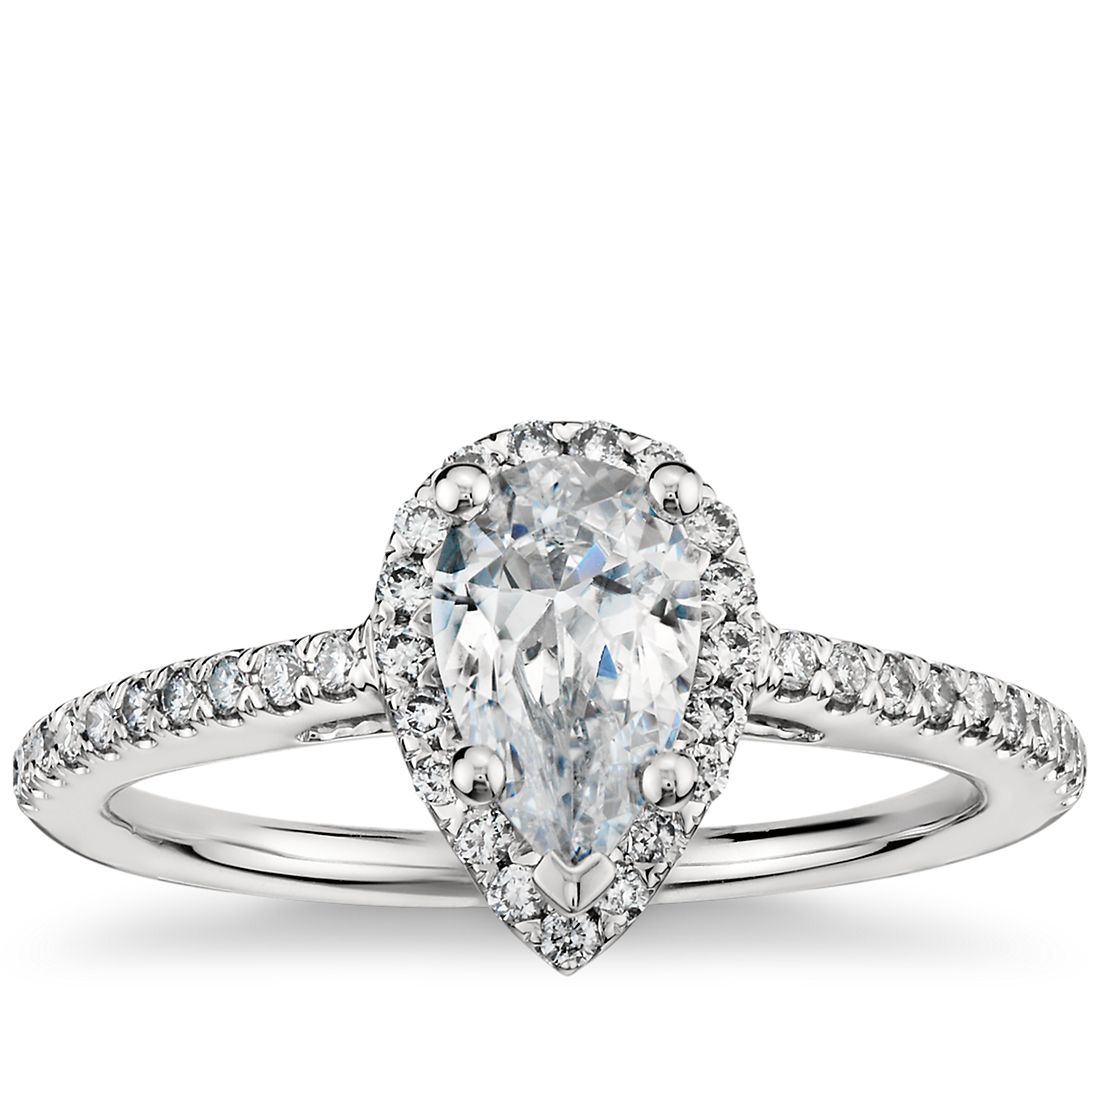 Pear Shaped Halo Diamond Engagement Ring in Platinum Blue Nile